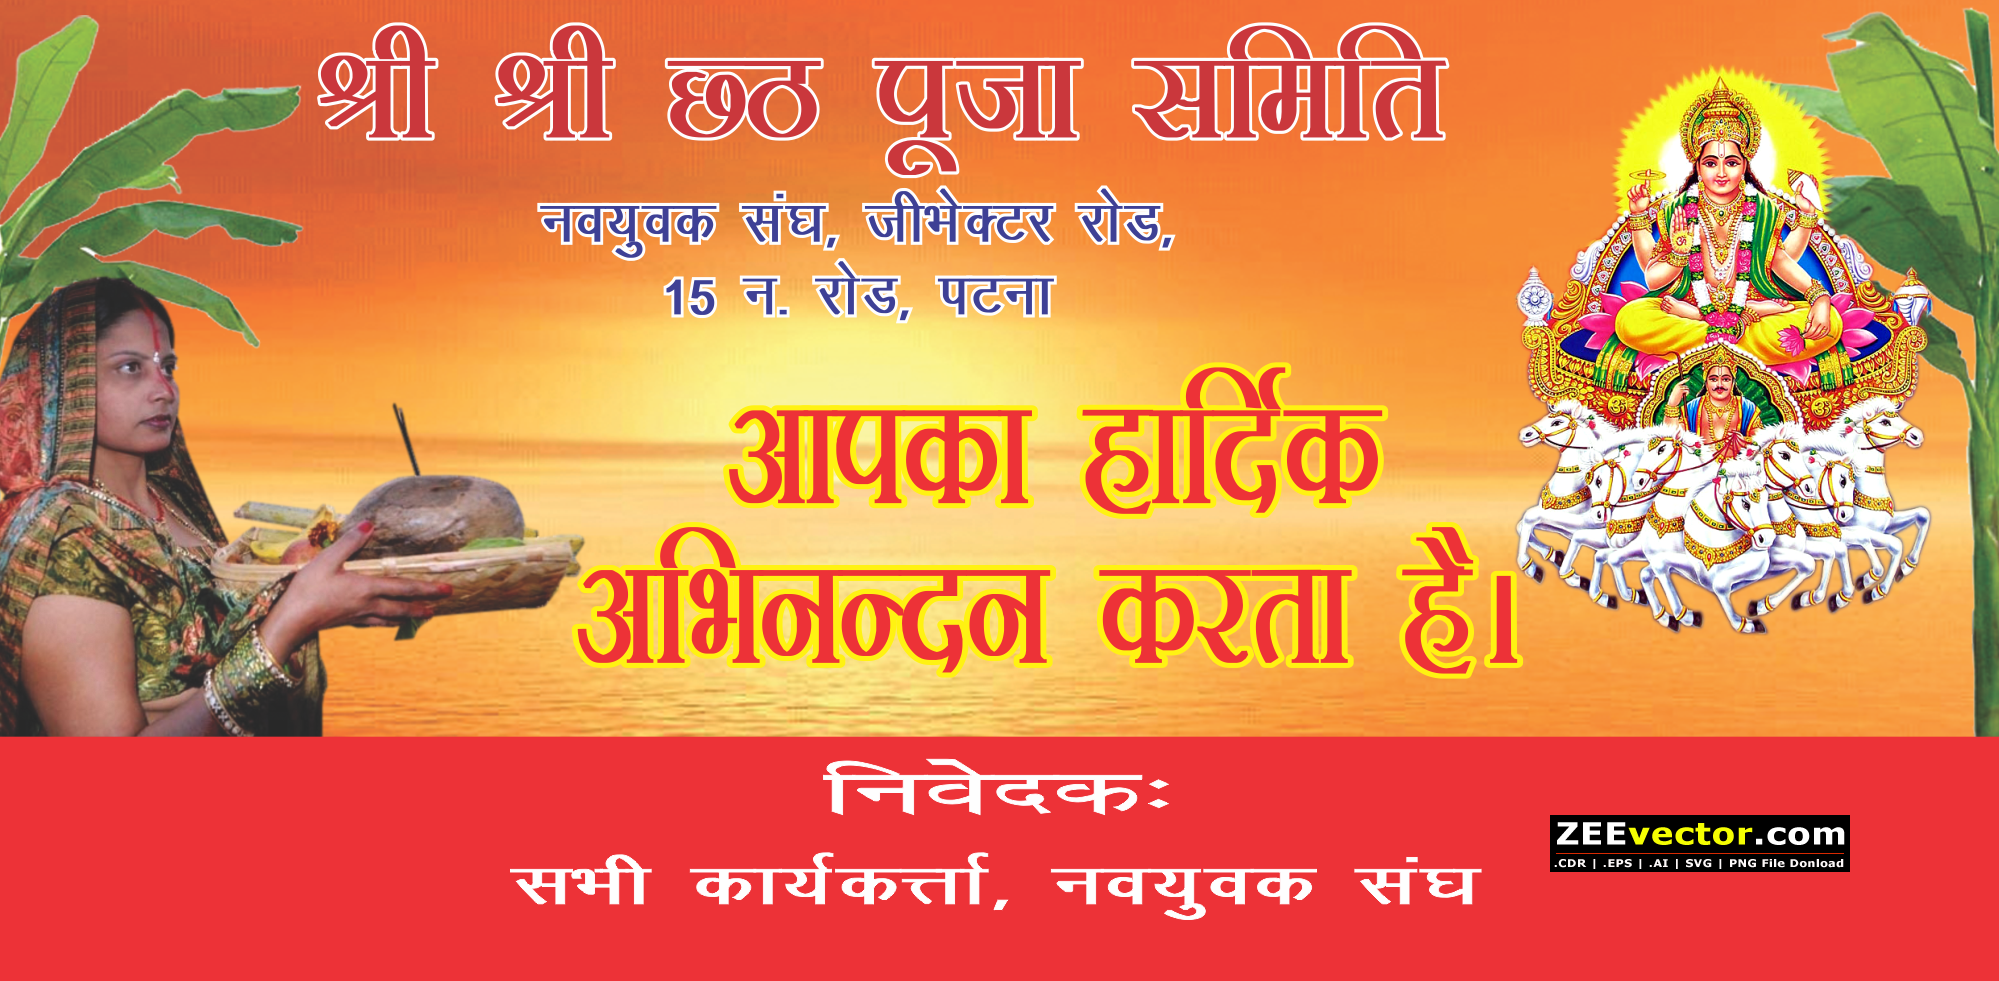 Chhath-Puja-Banner-CDR-FREE